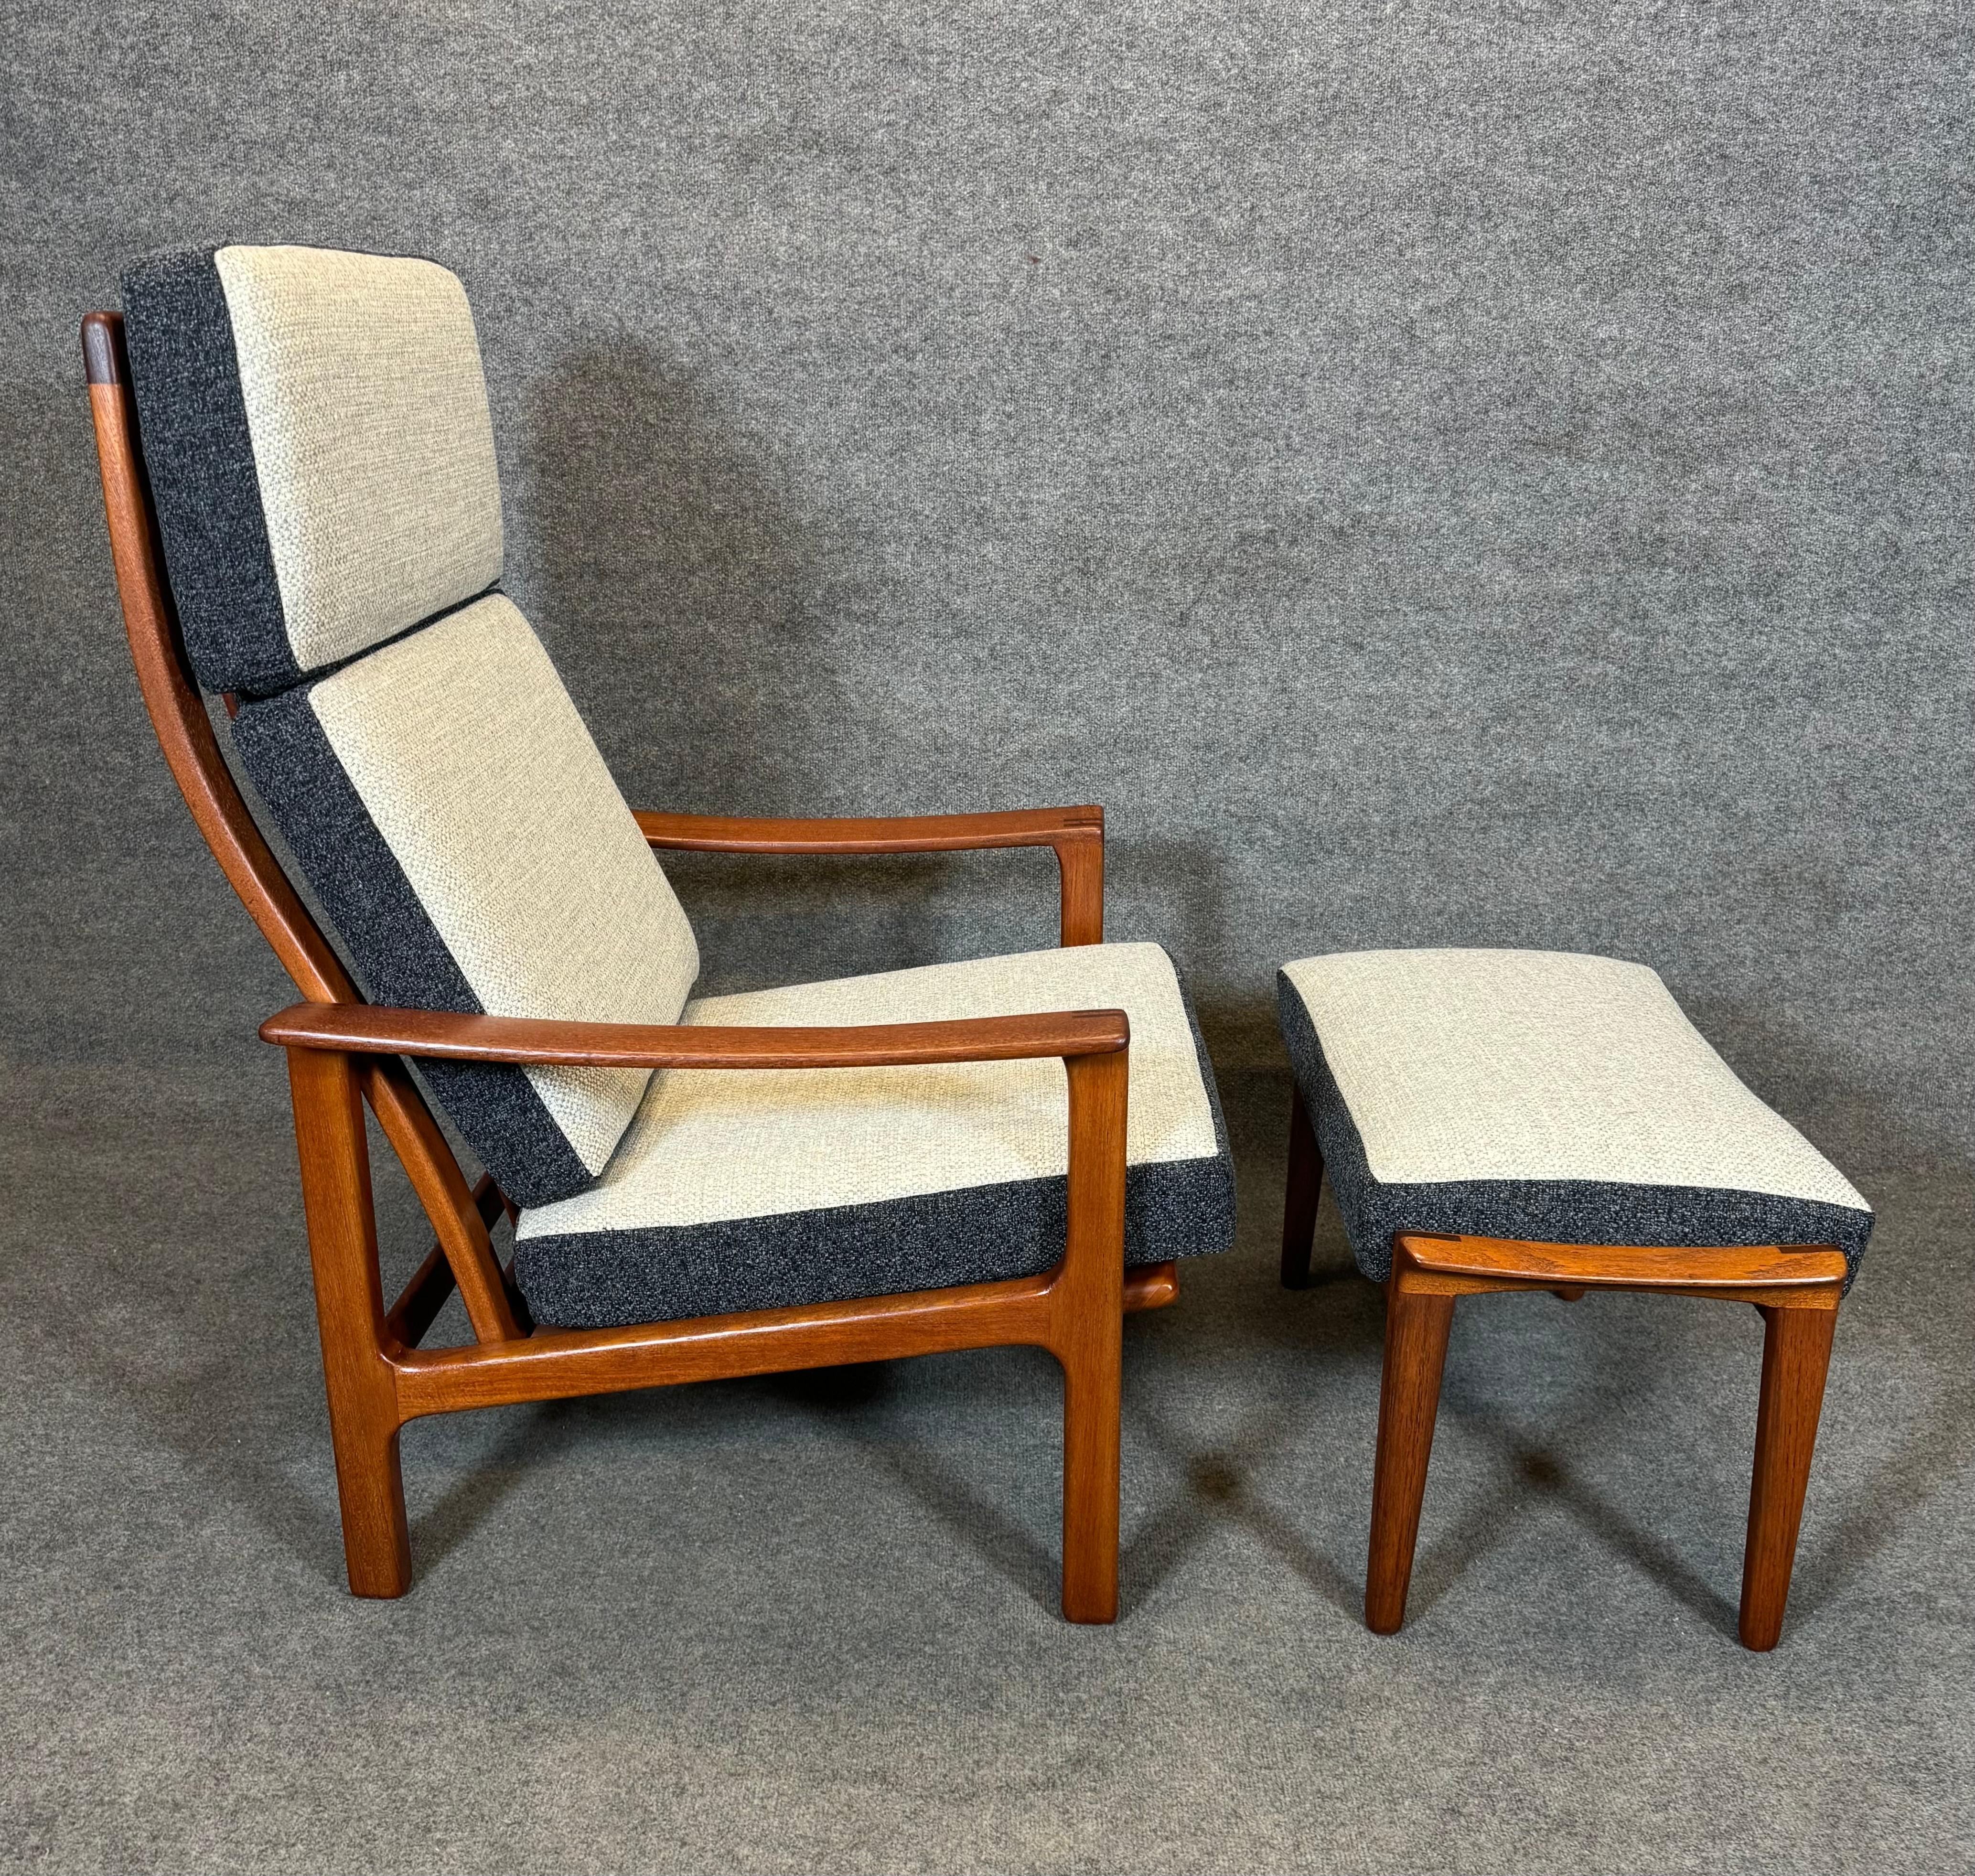 Here is a beautiful Scandinavian modern lounge chair-recliner and its ottoman in teak manufactured by Broderna Andersson in Sweden in the 1960's.
This comfortable set, recently imported from Europe to California before its refinishing, features a